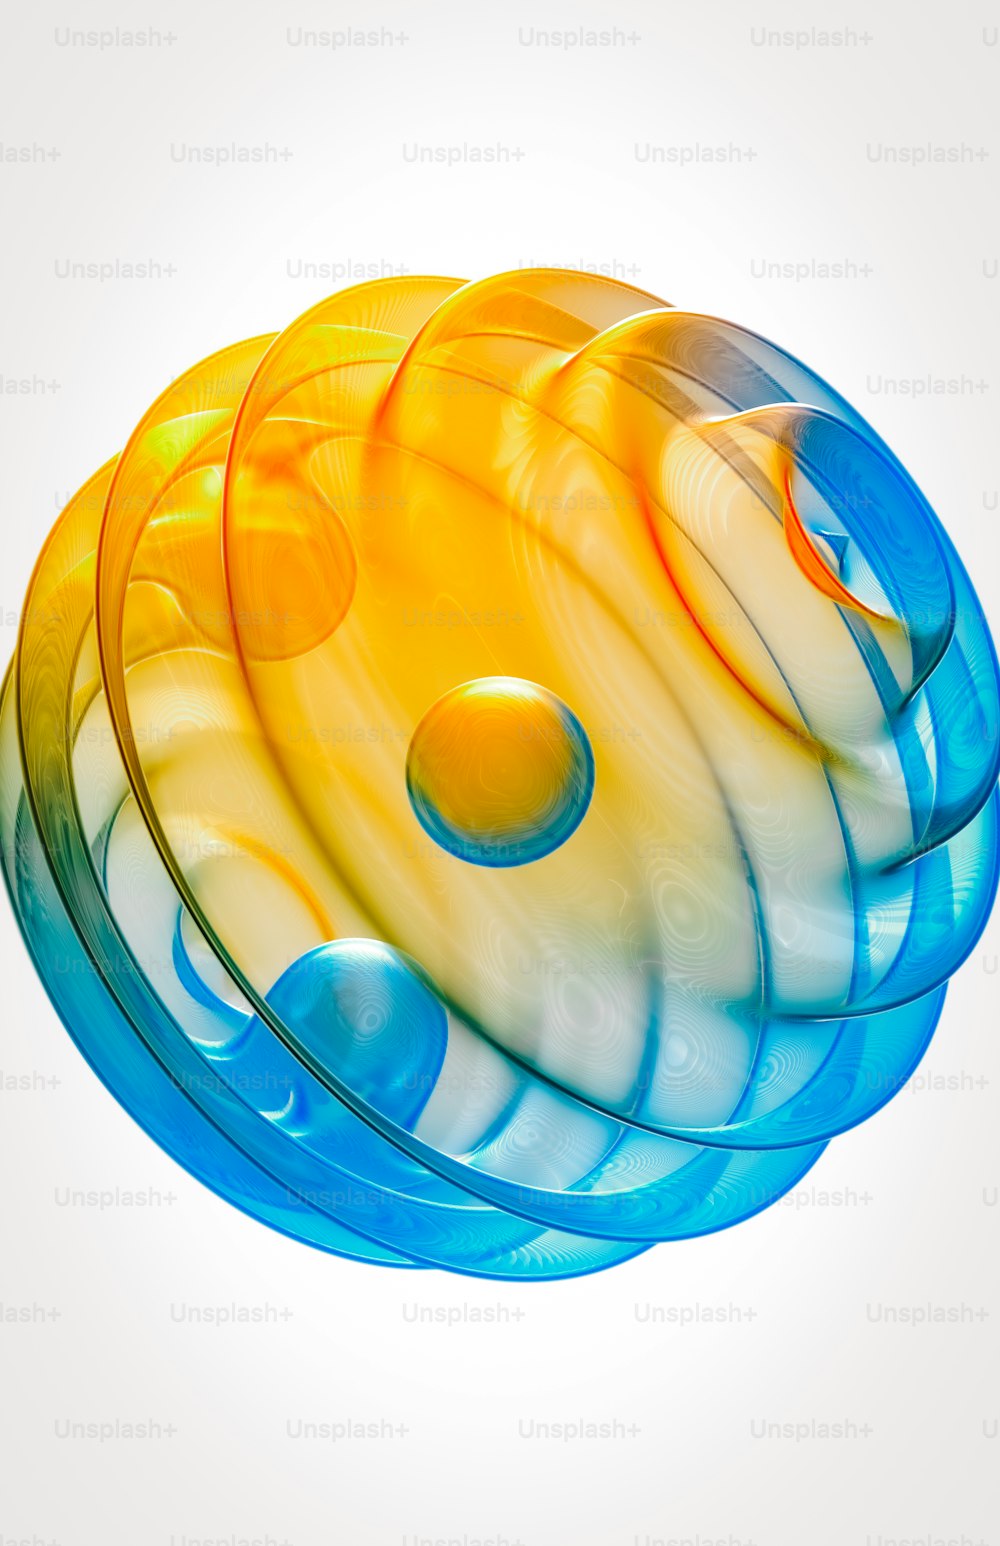 a blue, yellow, and orange object with a white background